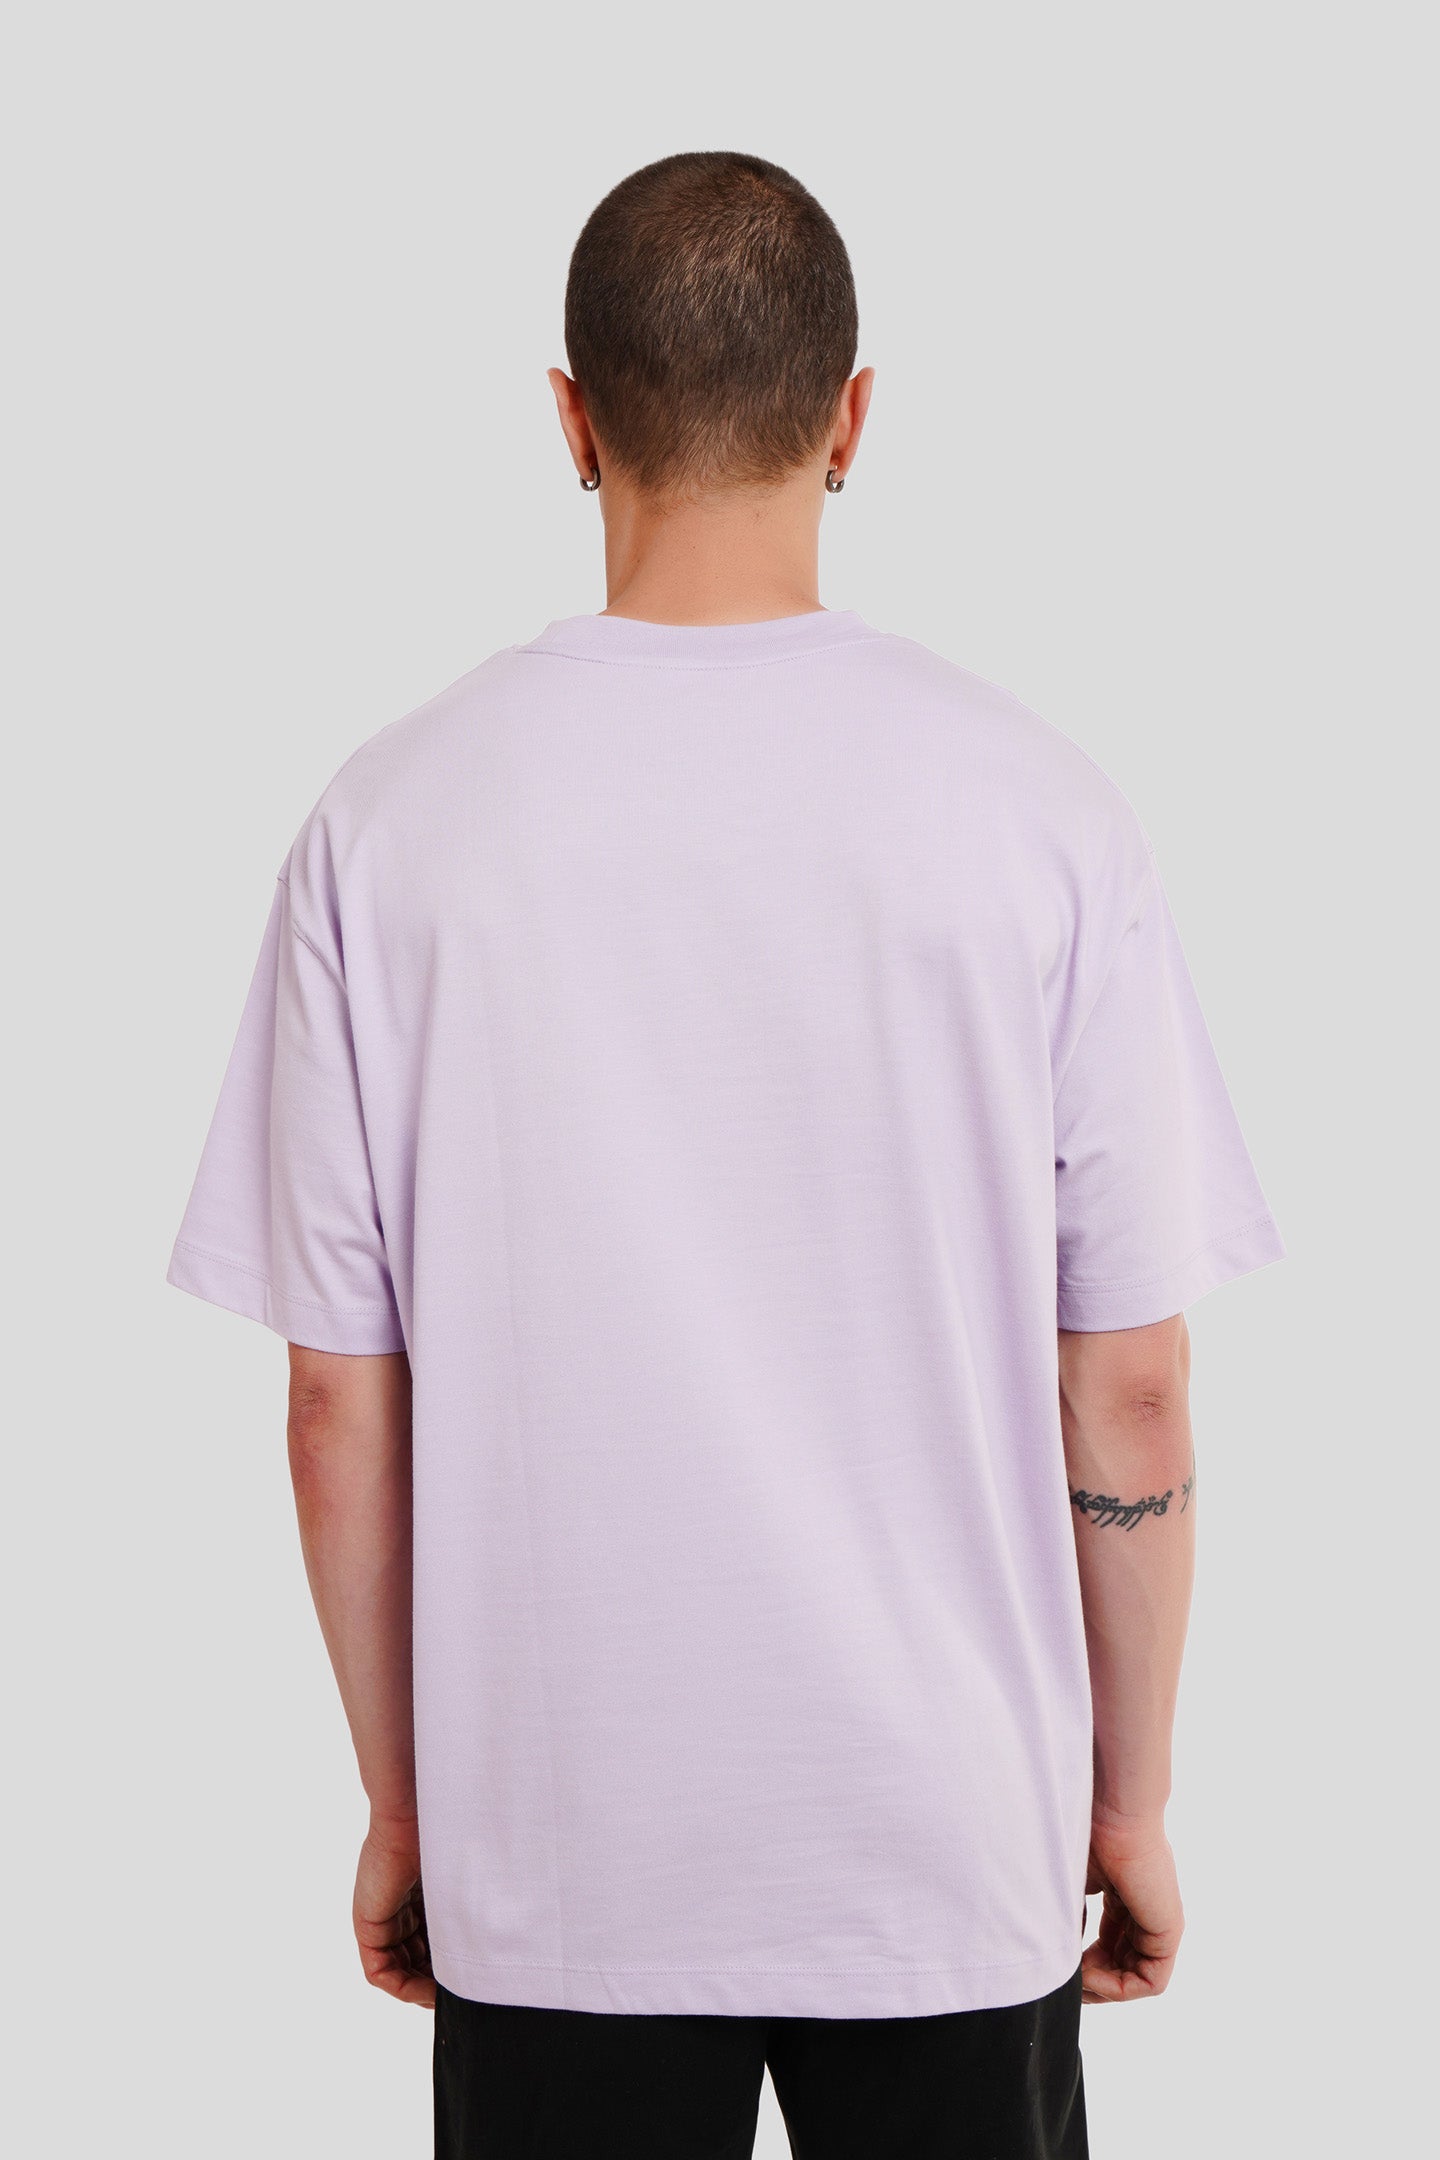 Never Give Up Lilac Printed T Shirt Men Oversized Fit With Front Design Pic 2